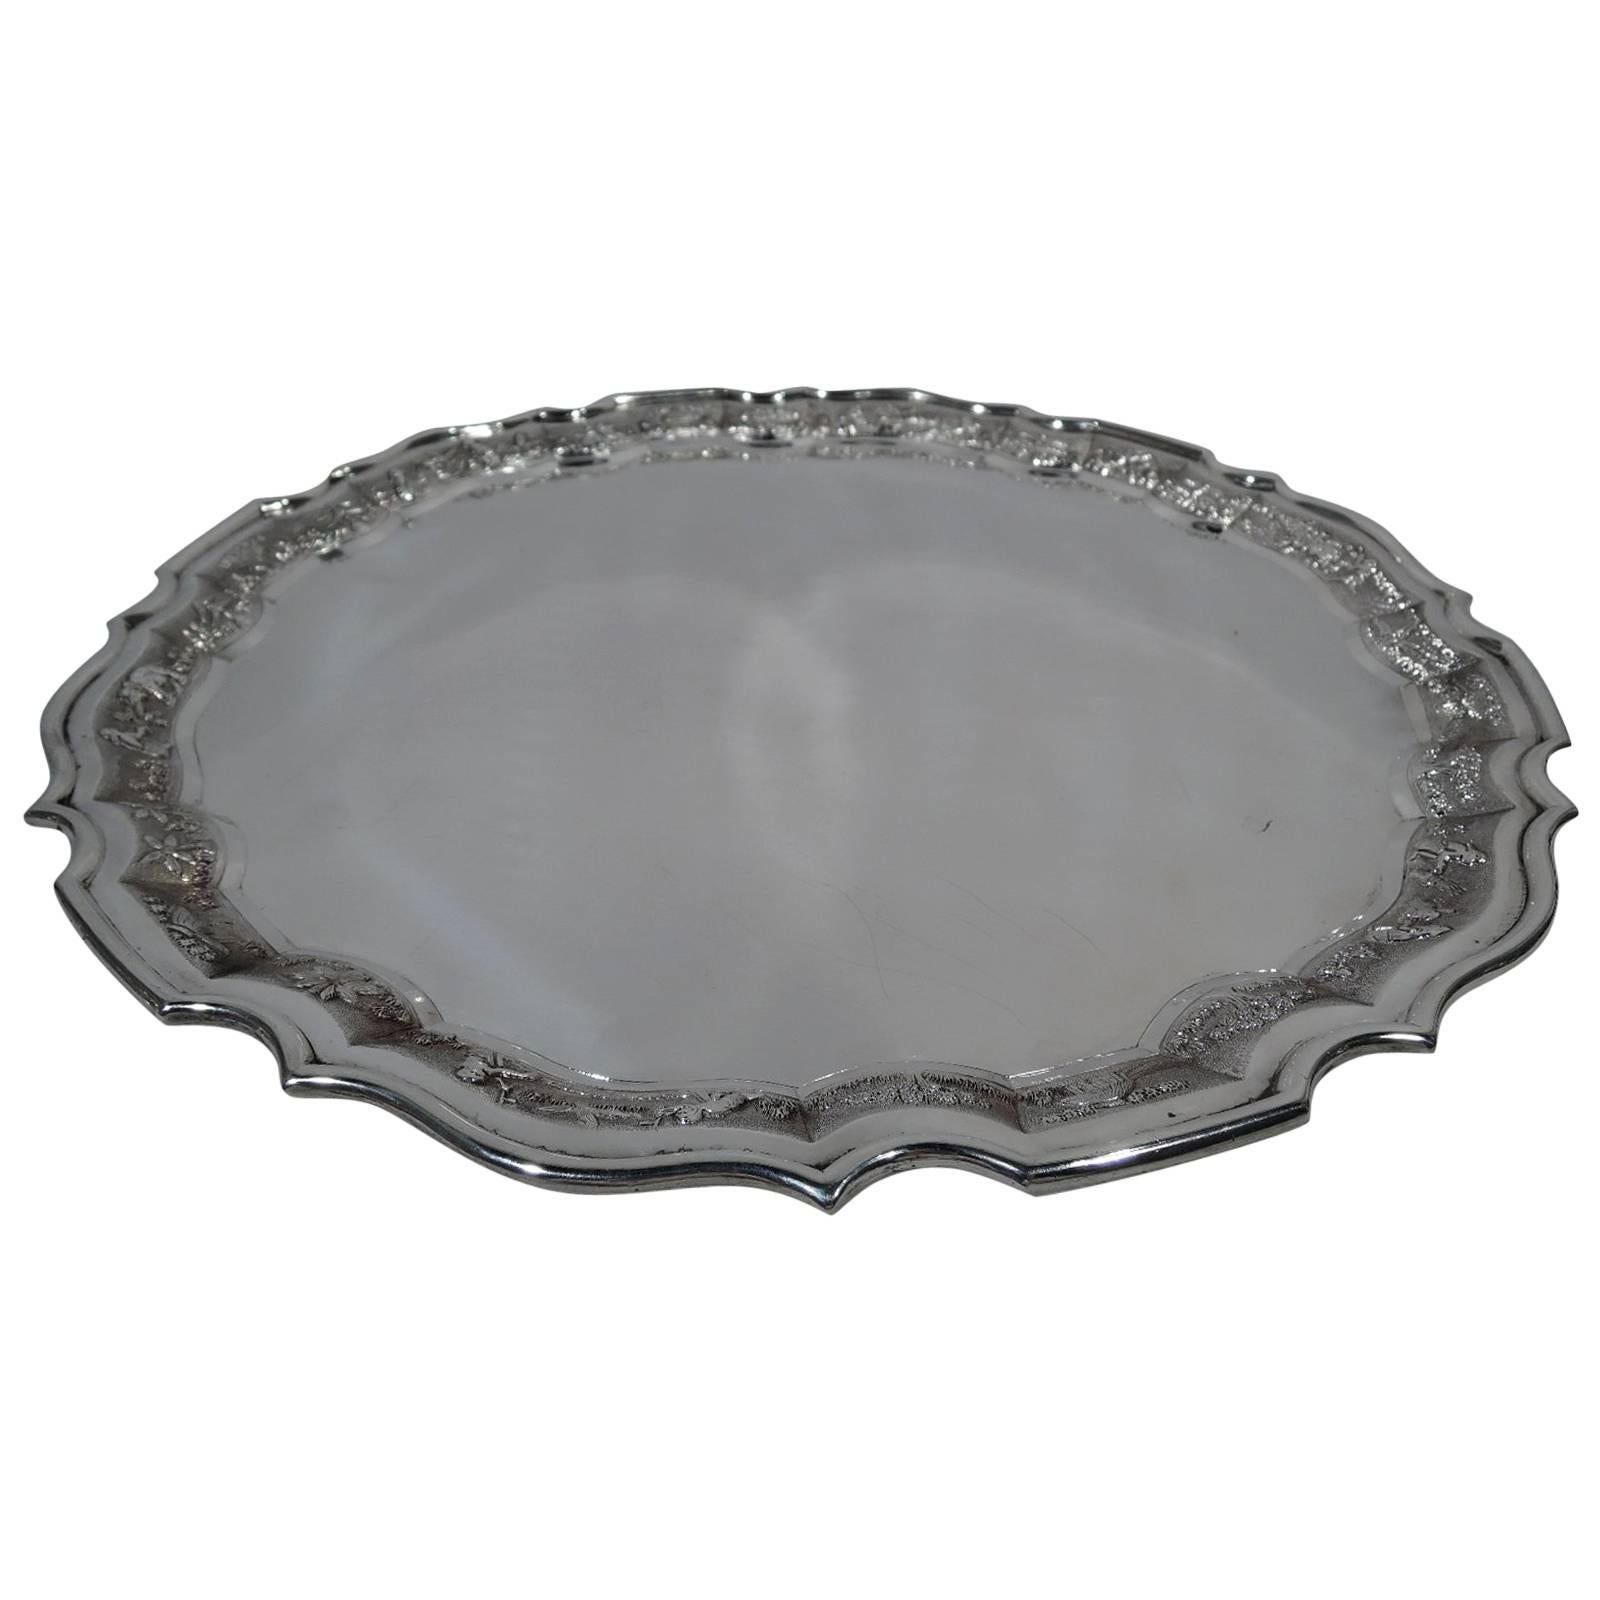 Antique Indo-Chinese Silver Tray with Exotic Ornament